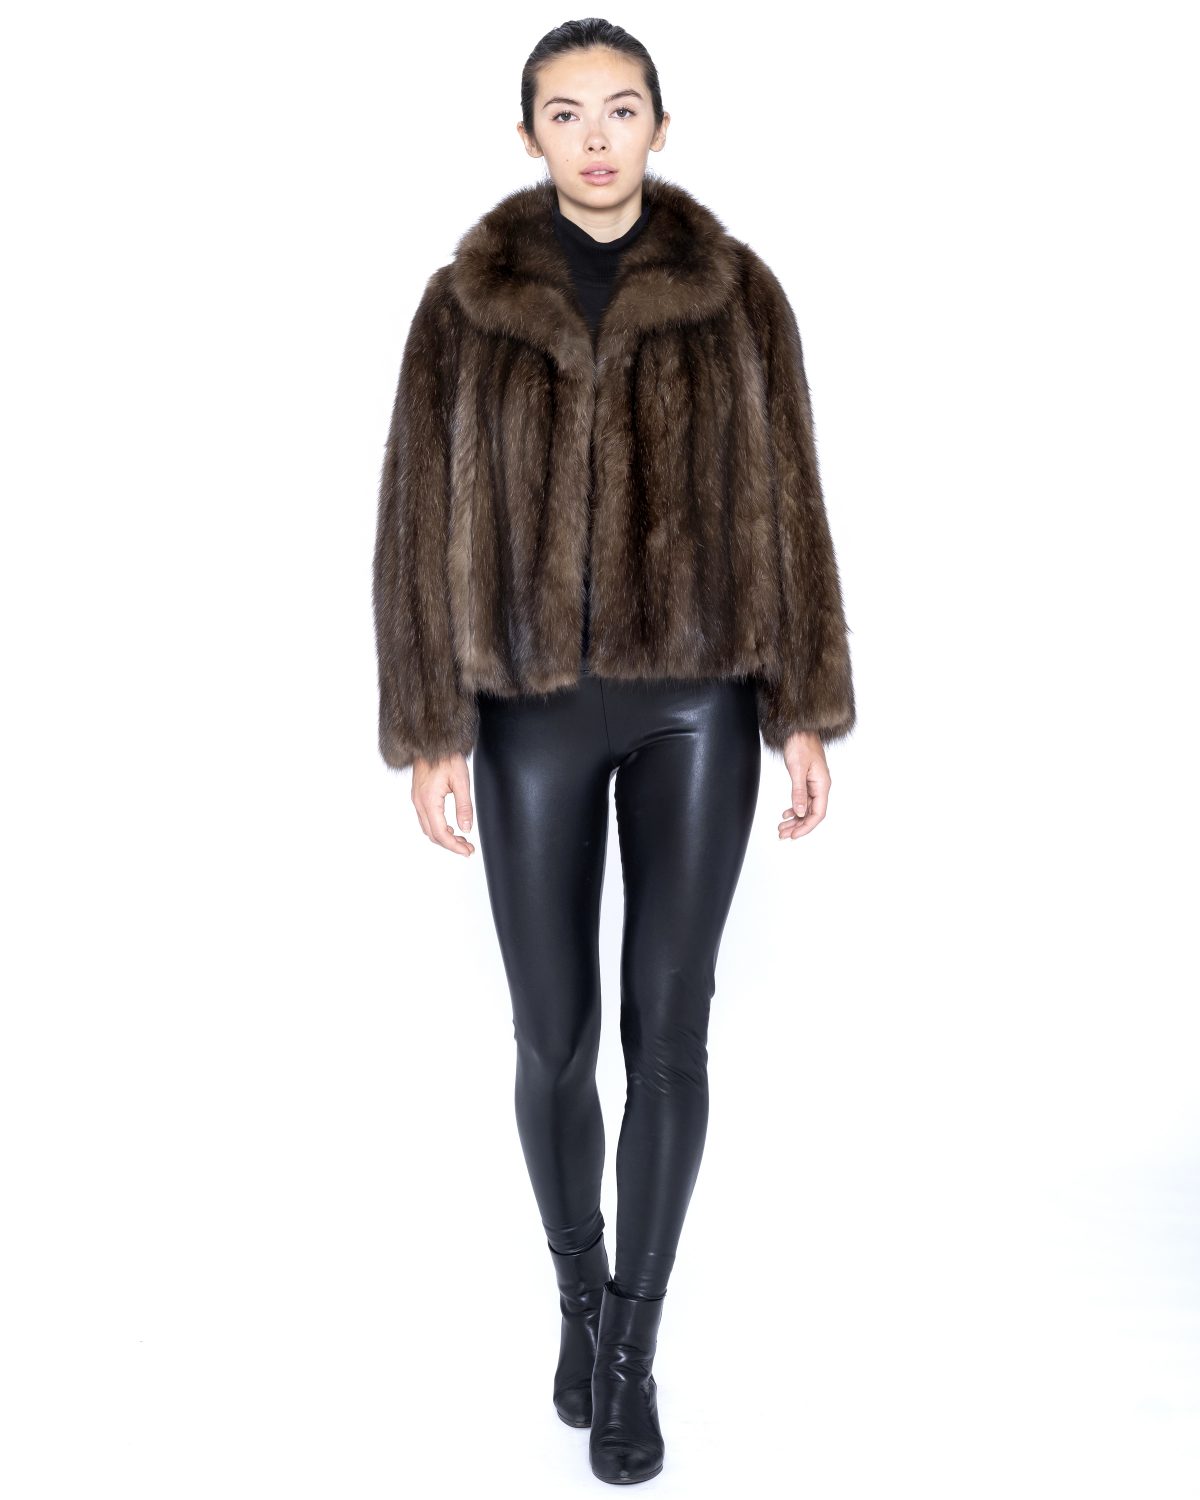 Russian Barguzin Sable Pre Owned Jacket Madison Avenue Furs And Henry Cowit Inc